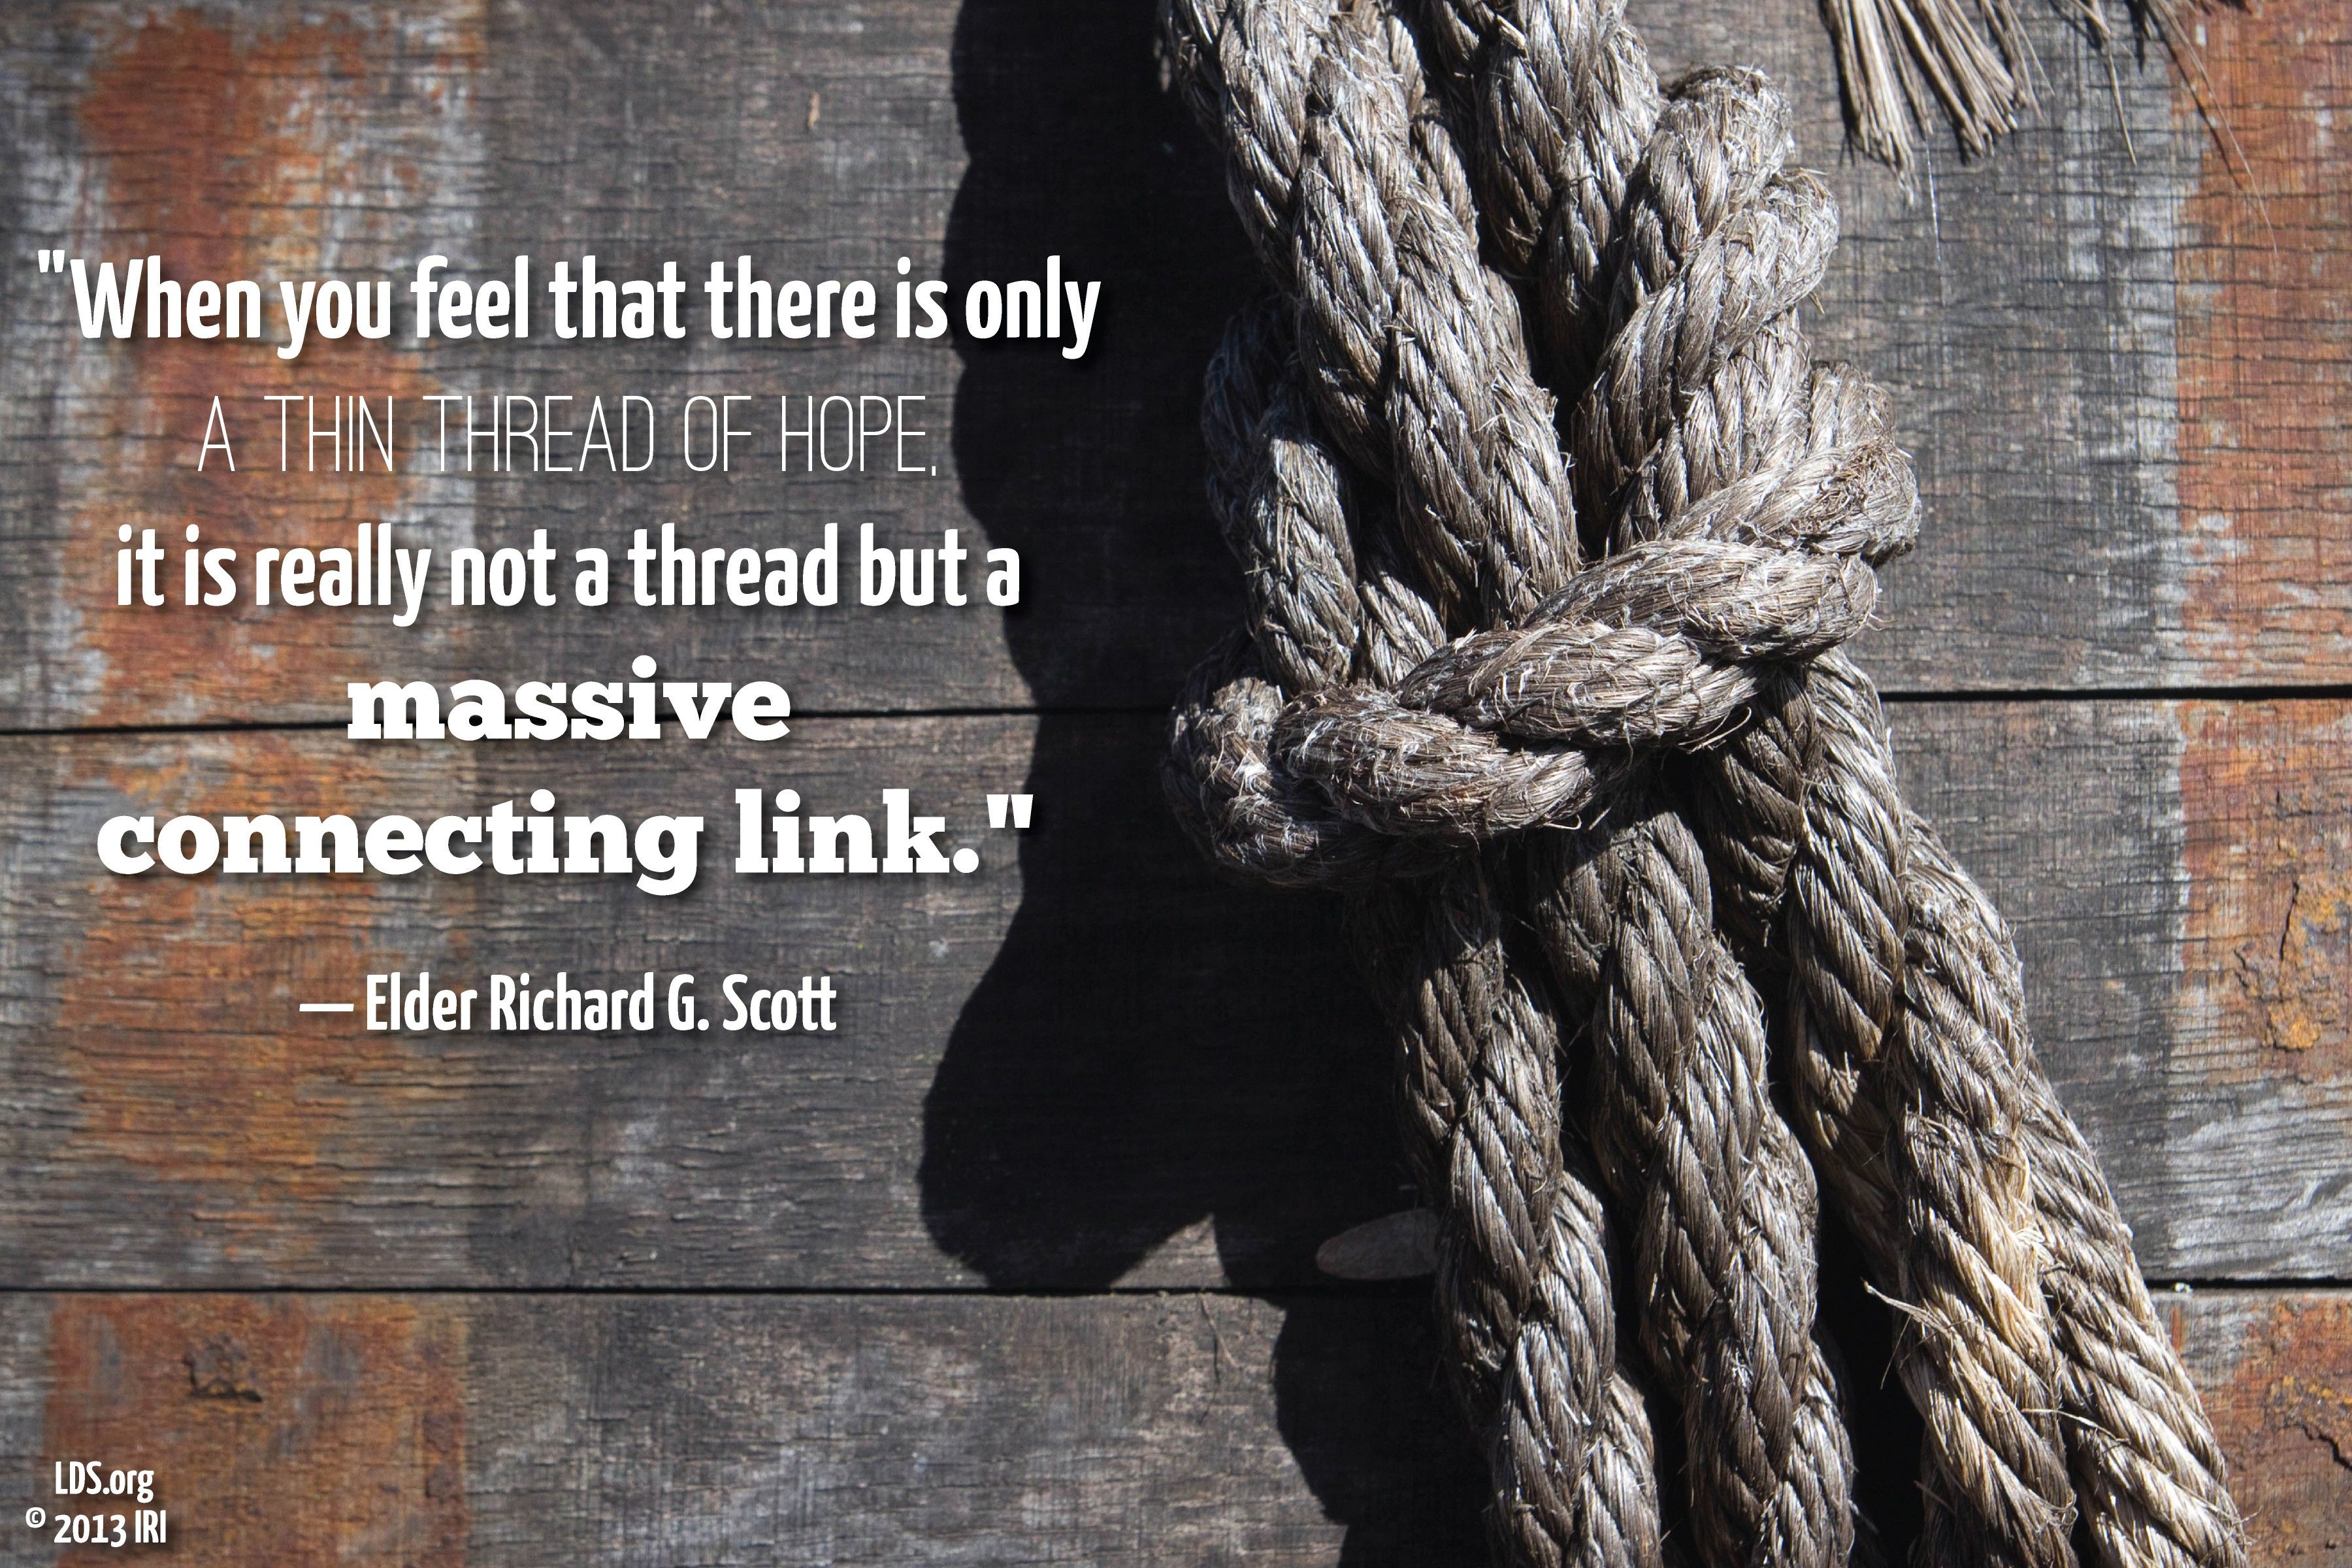 “When you feel that there is only a thin thread of hope, it is really not a thread but a massive connecting link.”—Elder Richard G. Scott, “For Peace at Home” © undefined ipCode 1.